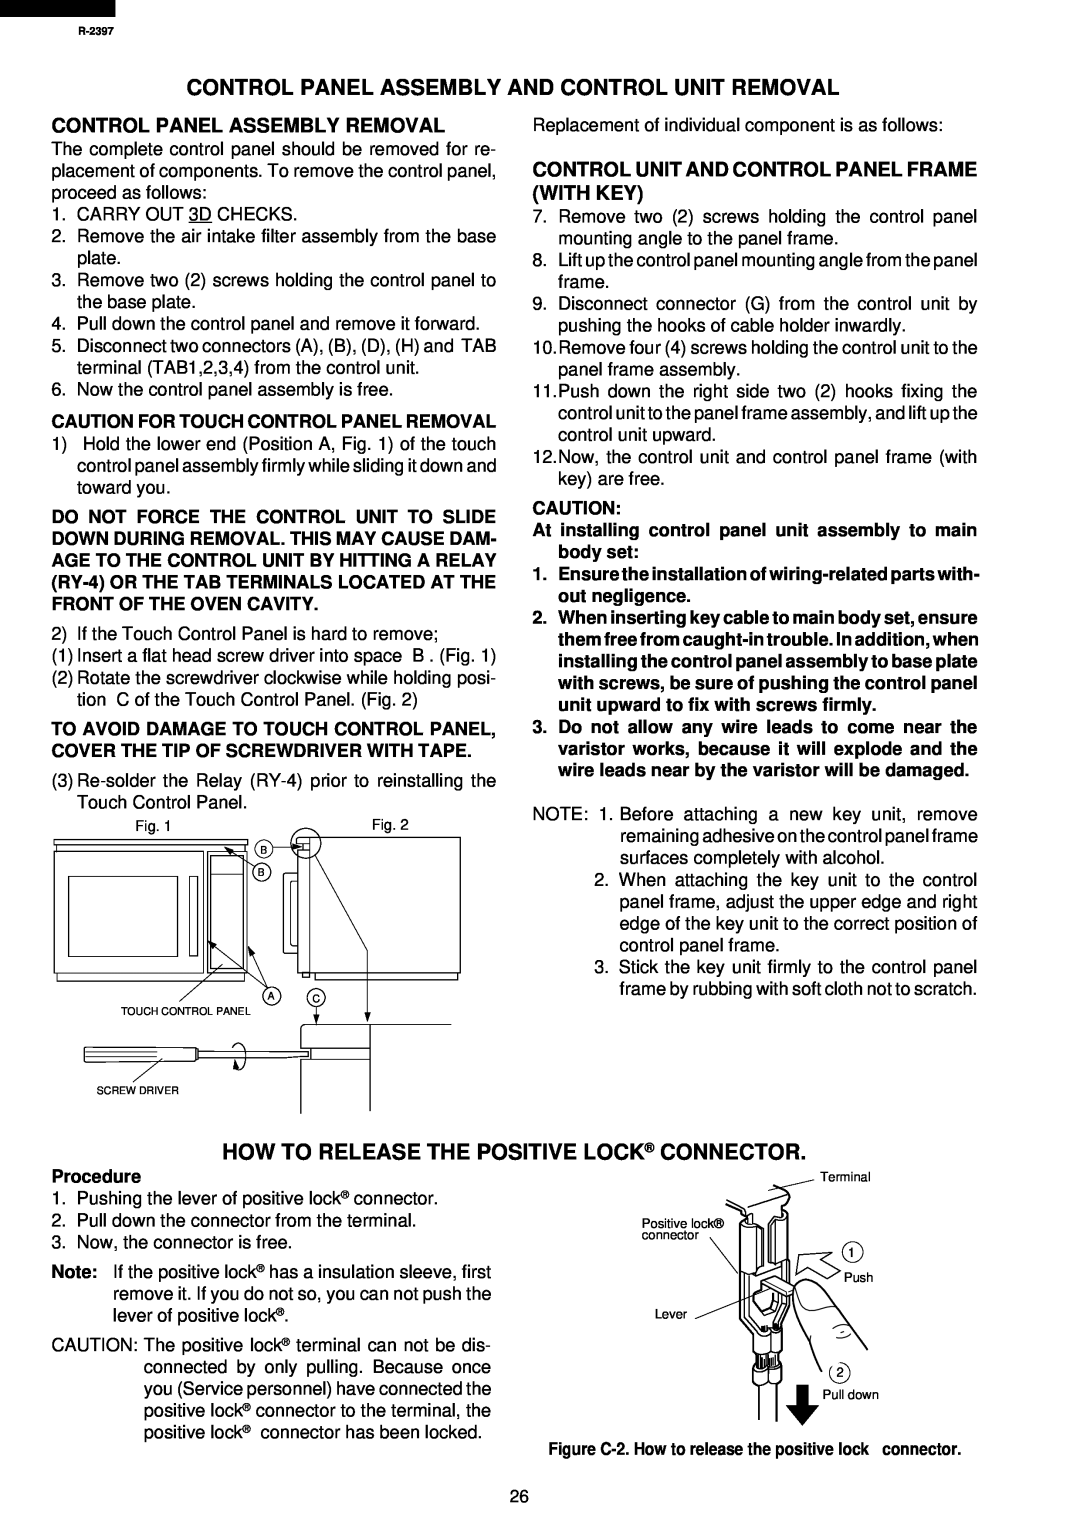 Sharp R-2397 Control Panel Assembly And Control Unit Removal, How To Release The Positive Lock Connector, Procedure 